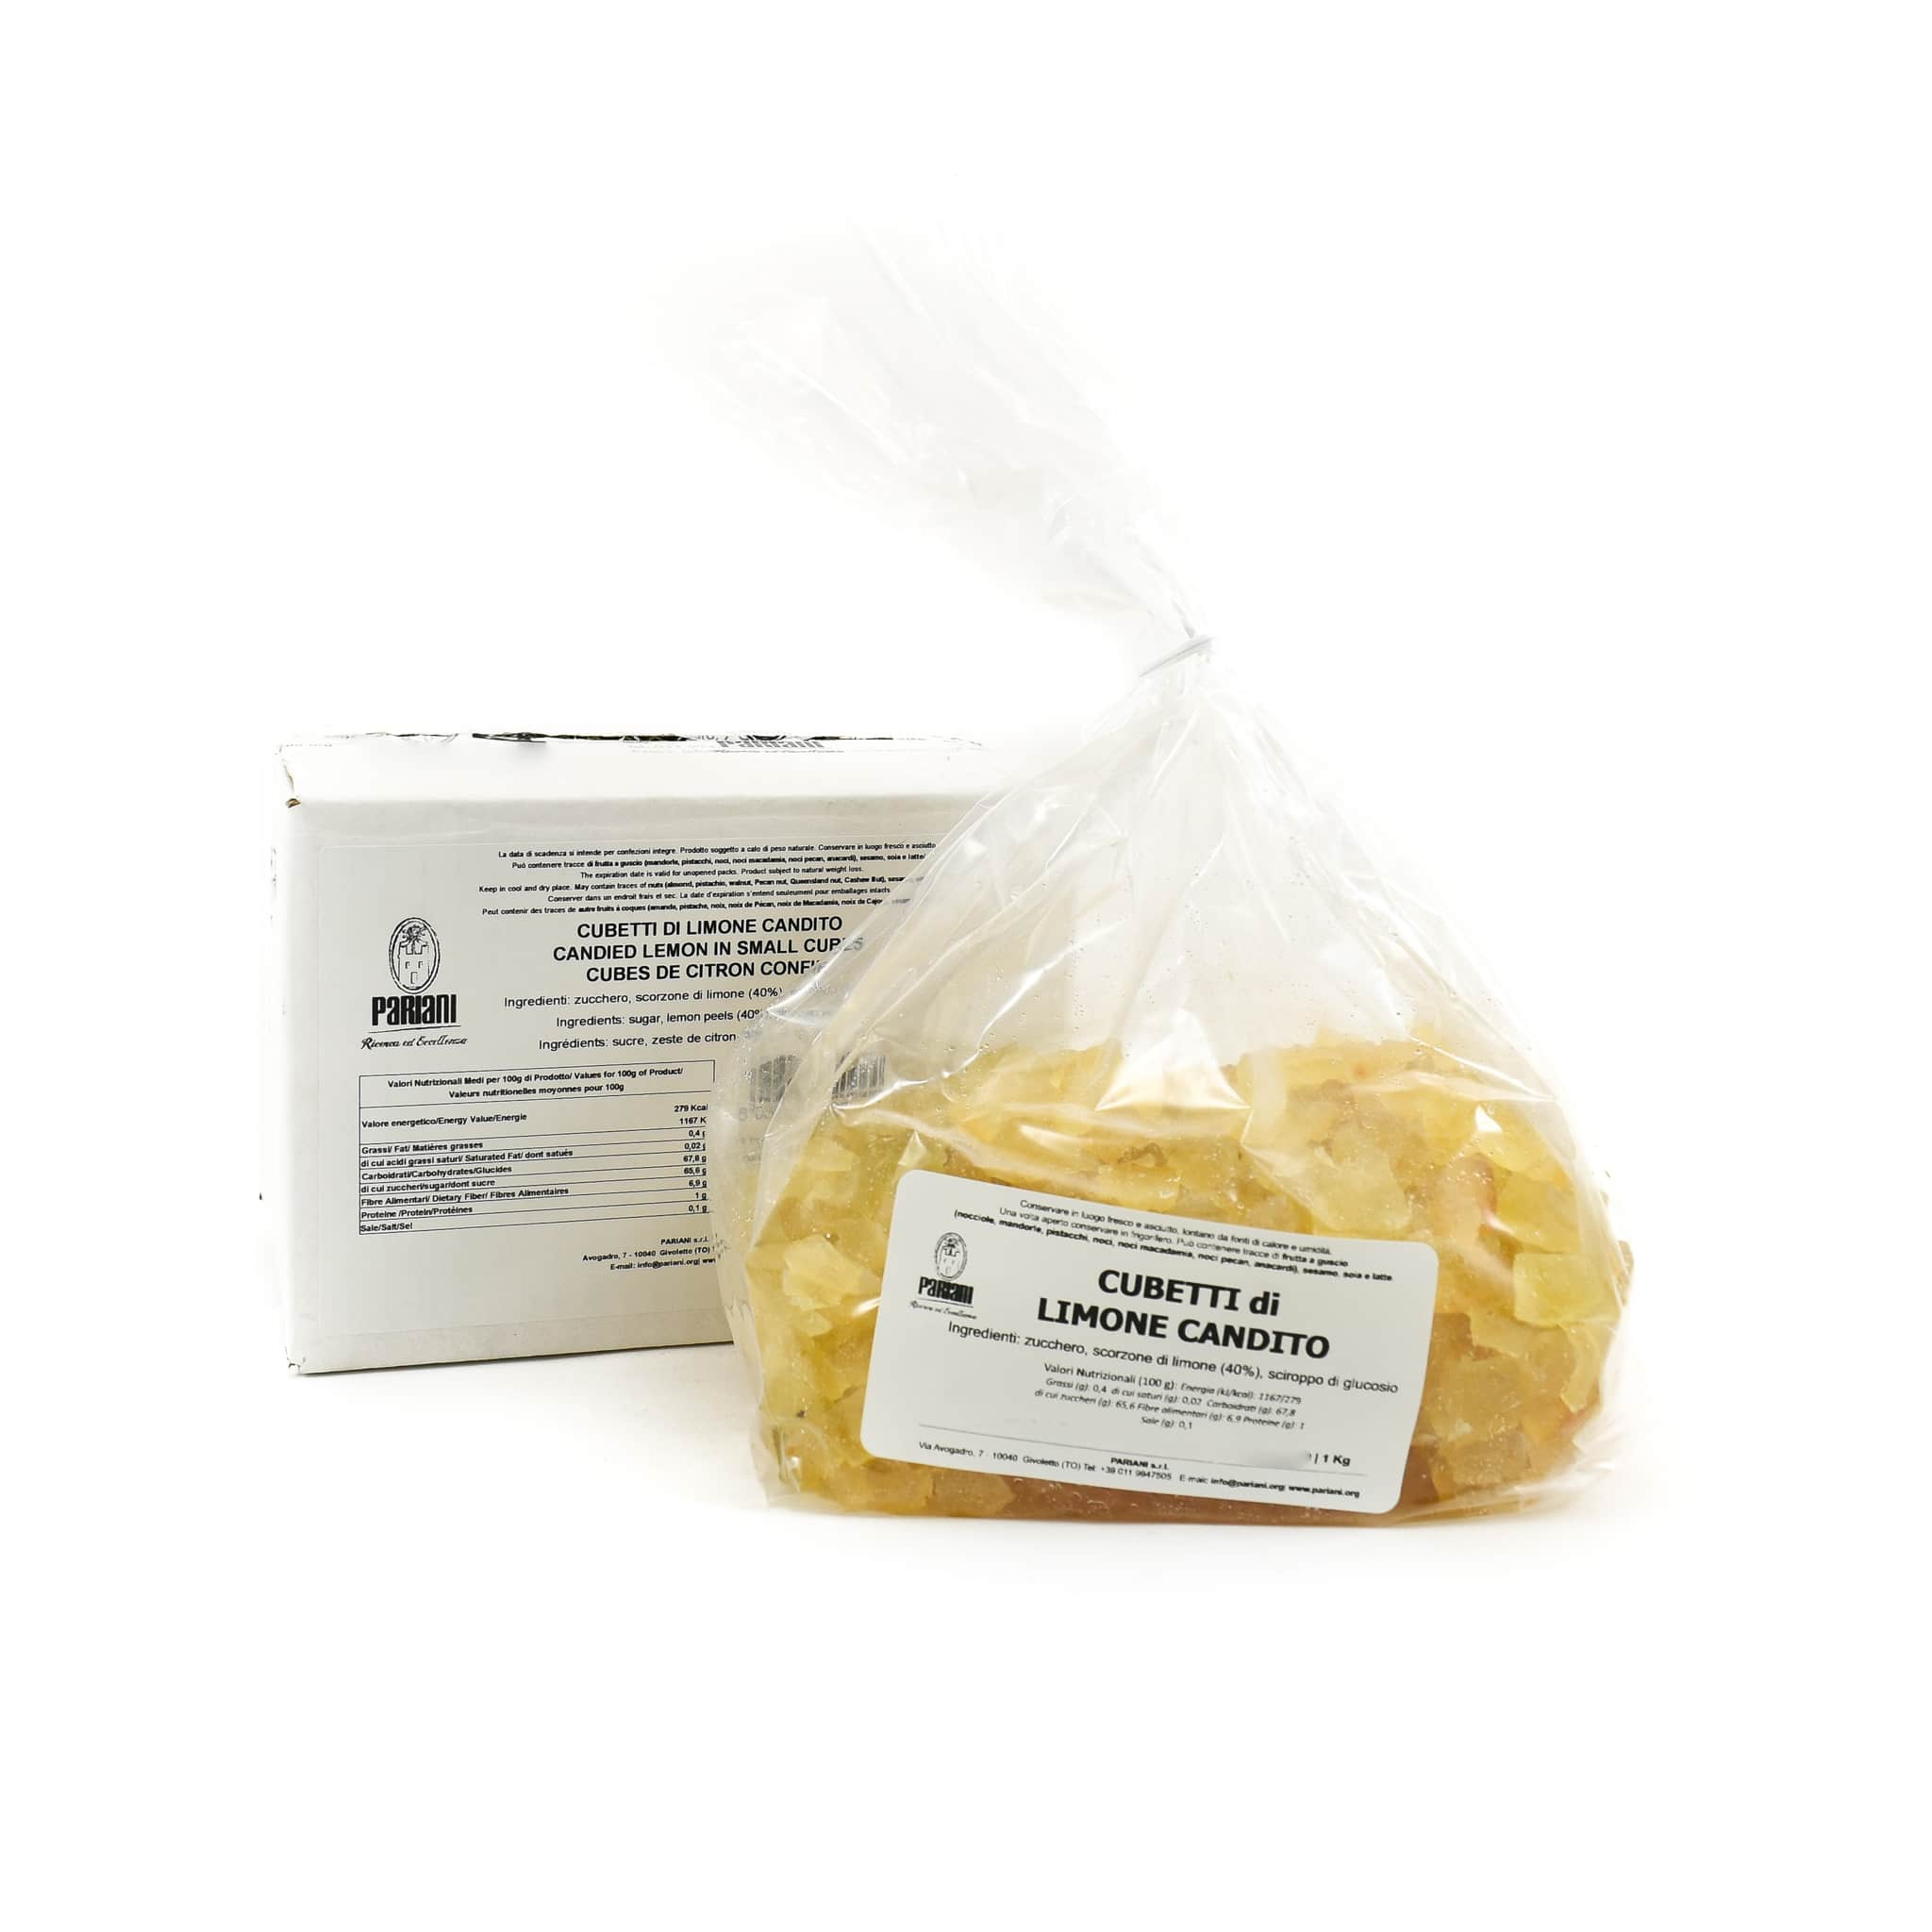 Pariani Candied Lemon In Small Cubes 1kg packaging